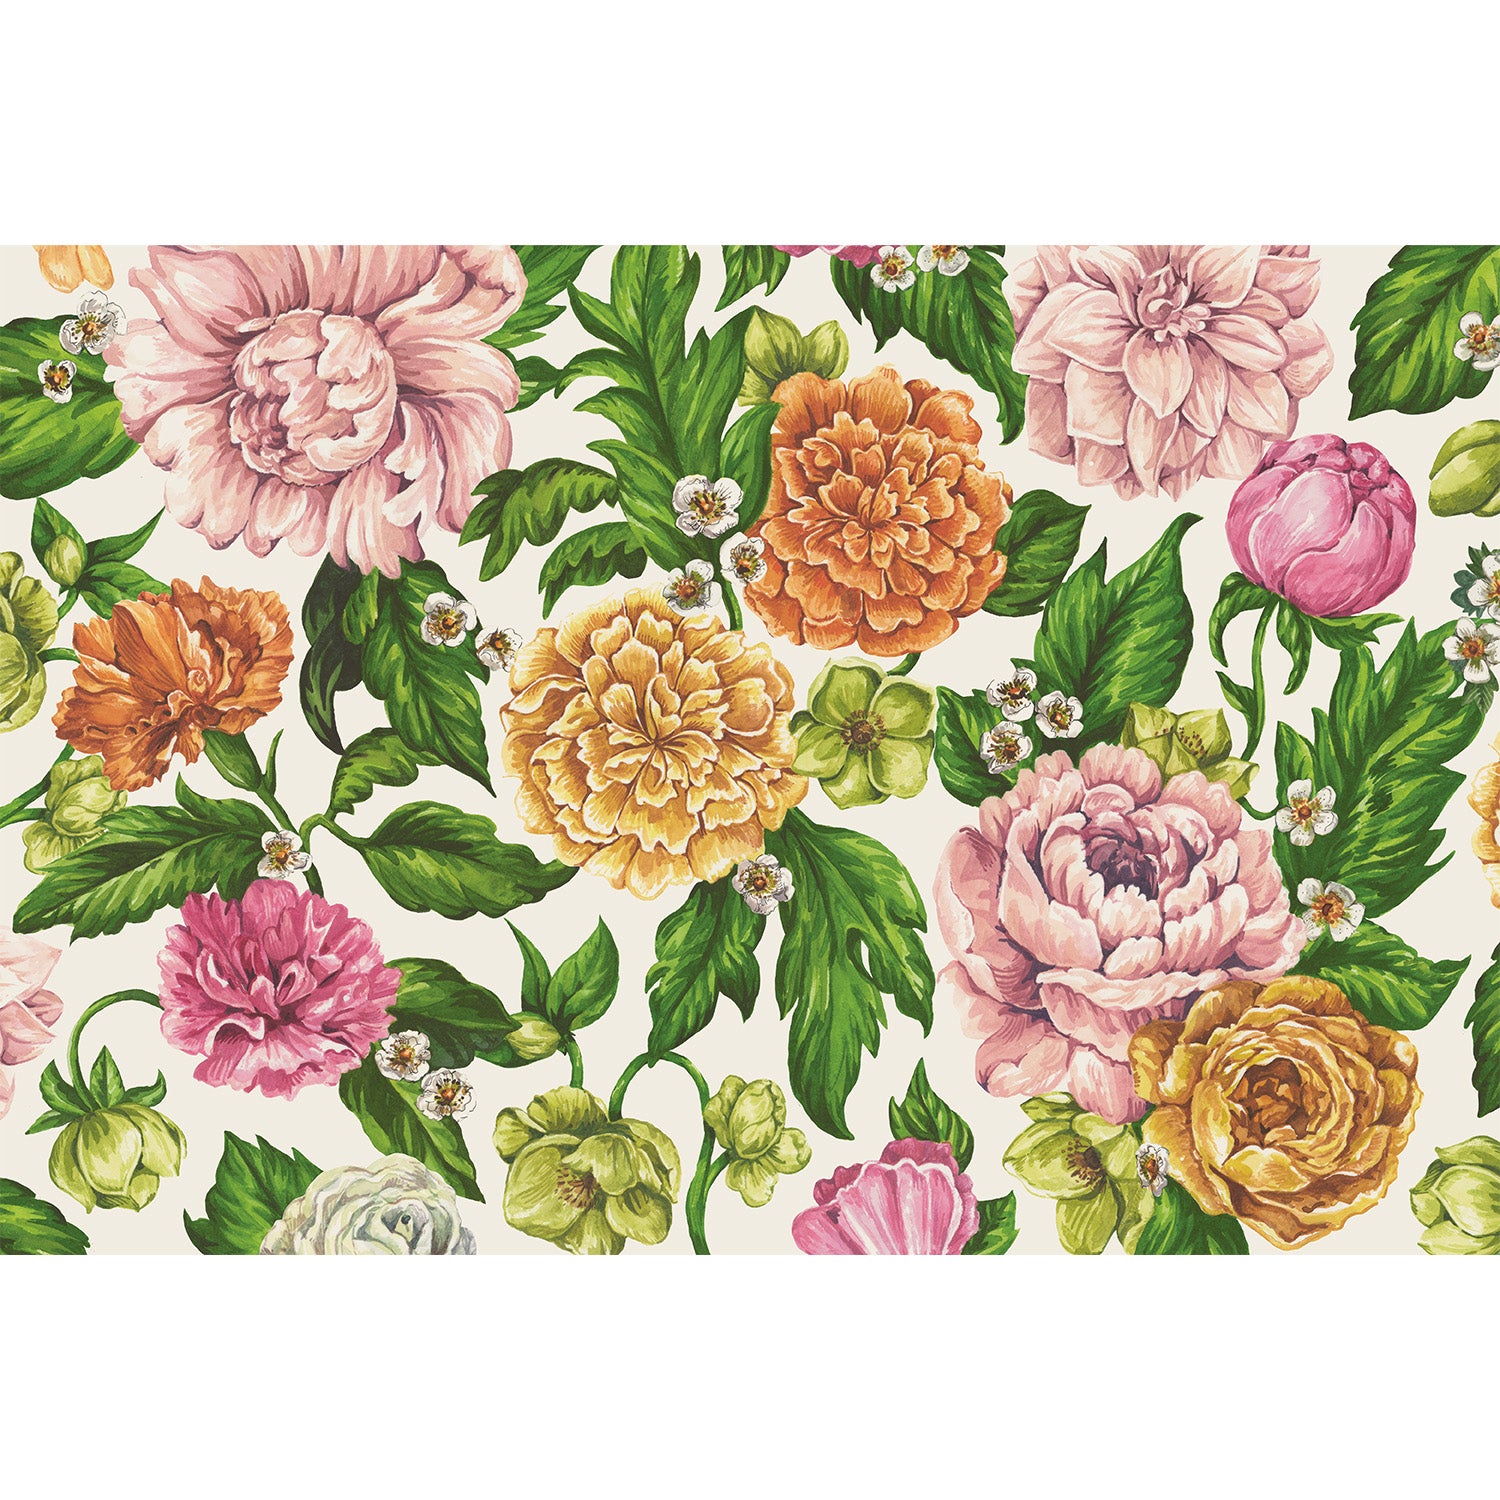 Large, illustrated flowers in muted pink, orange and yellow, surrounded by vibrant green foliage, scattered on a white background.